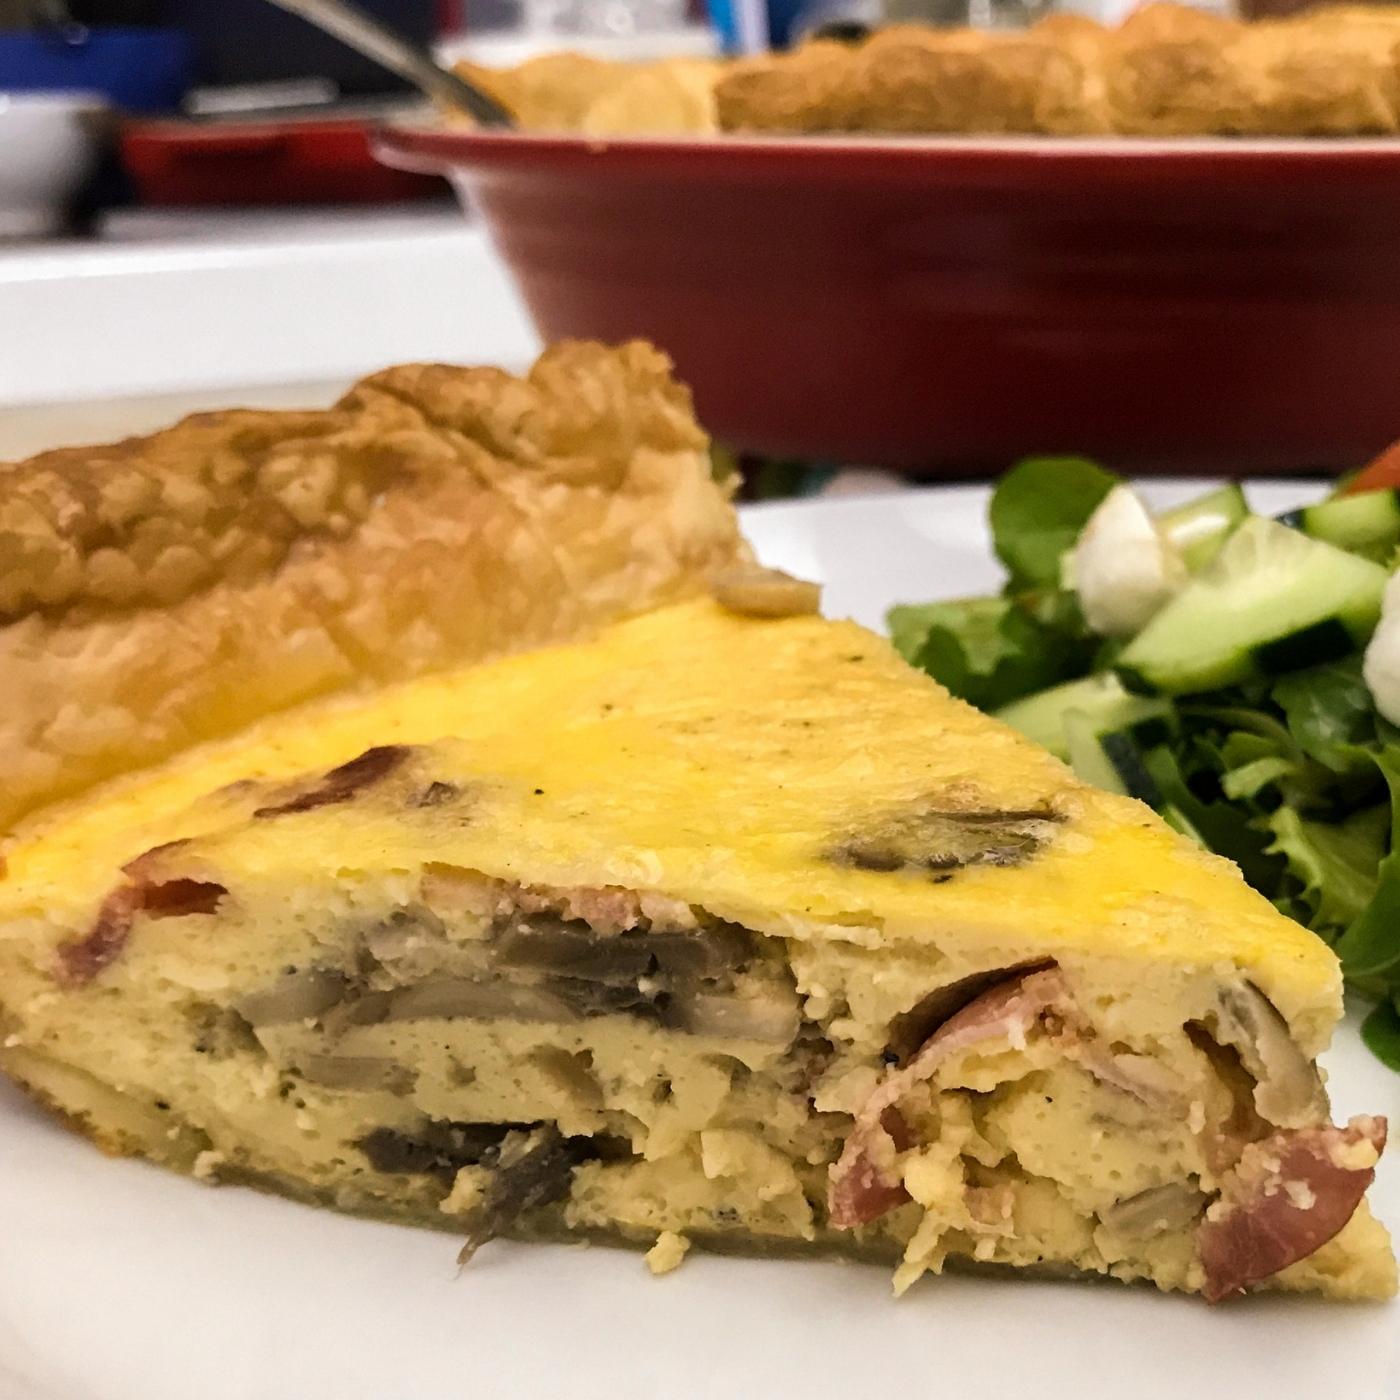 Bacon quiche with mushroom and shallot